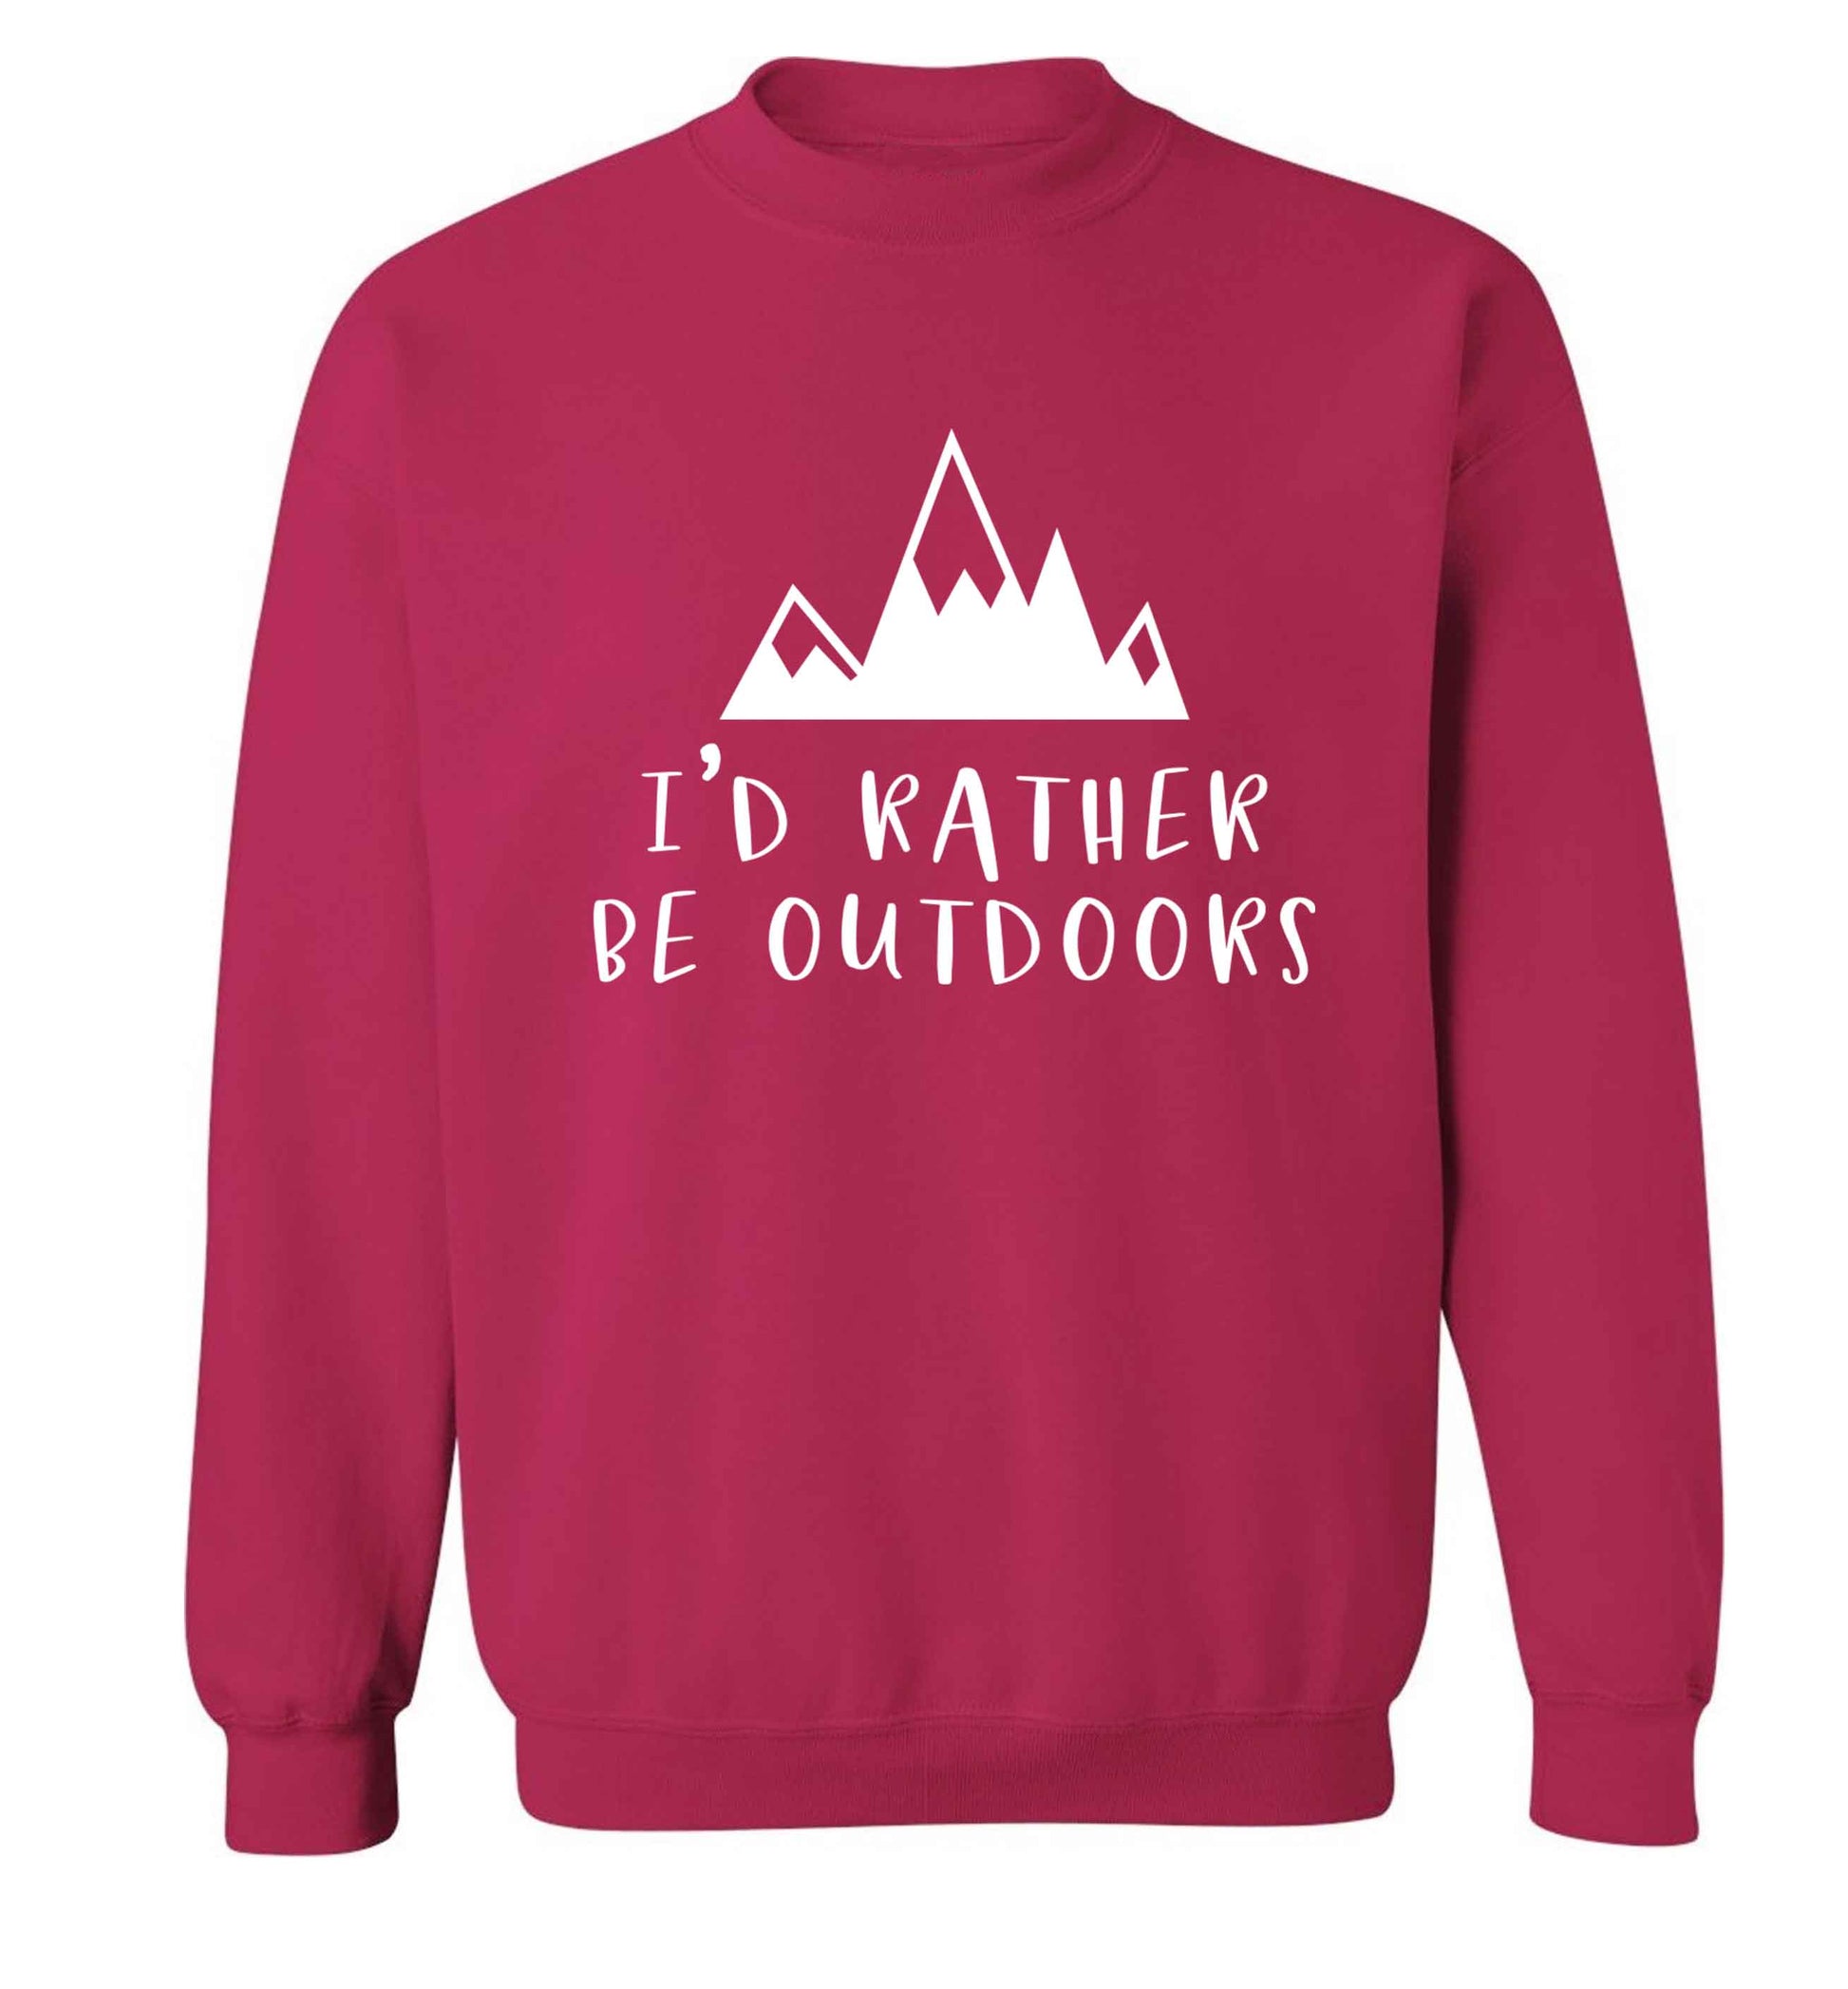 I'd rather be outdoors Adult's unisex pink Sweater 2XL